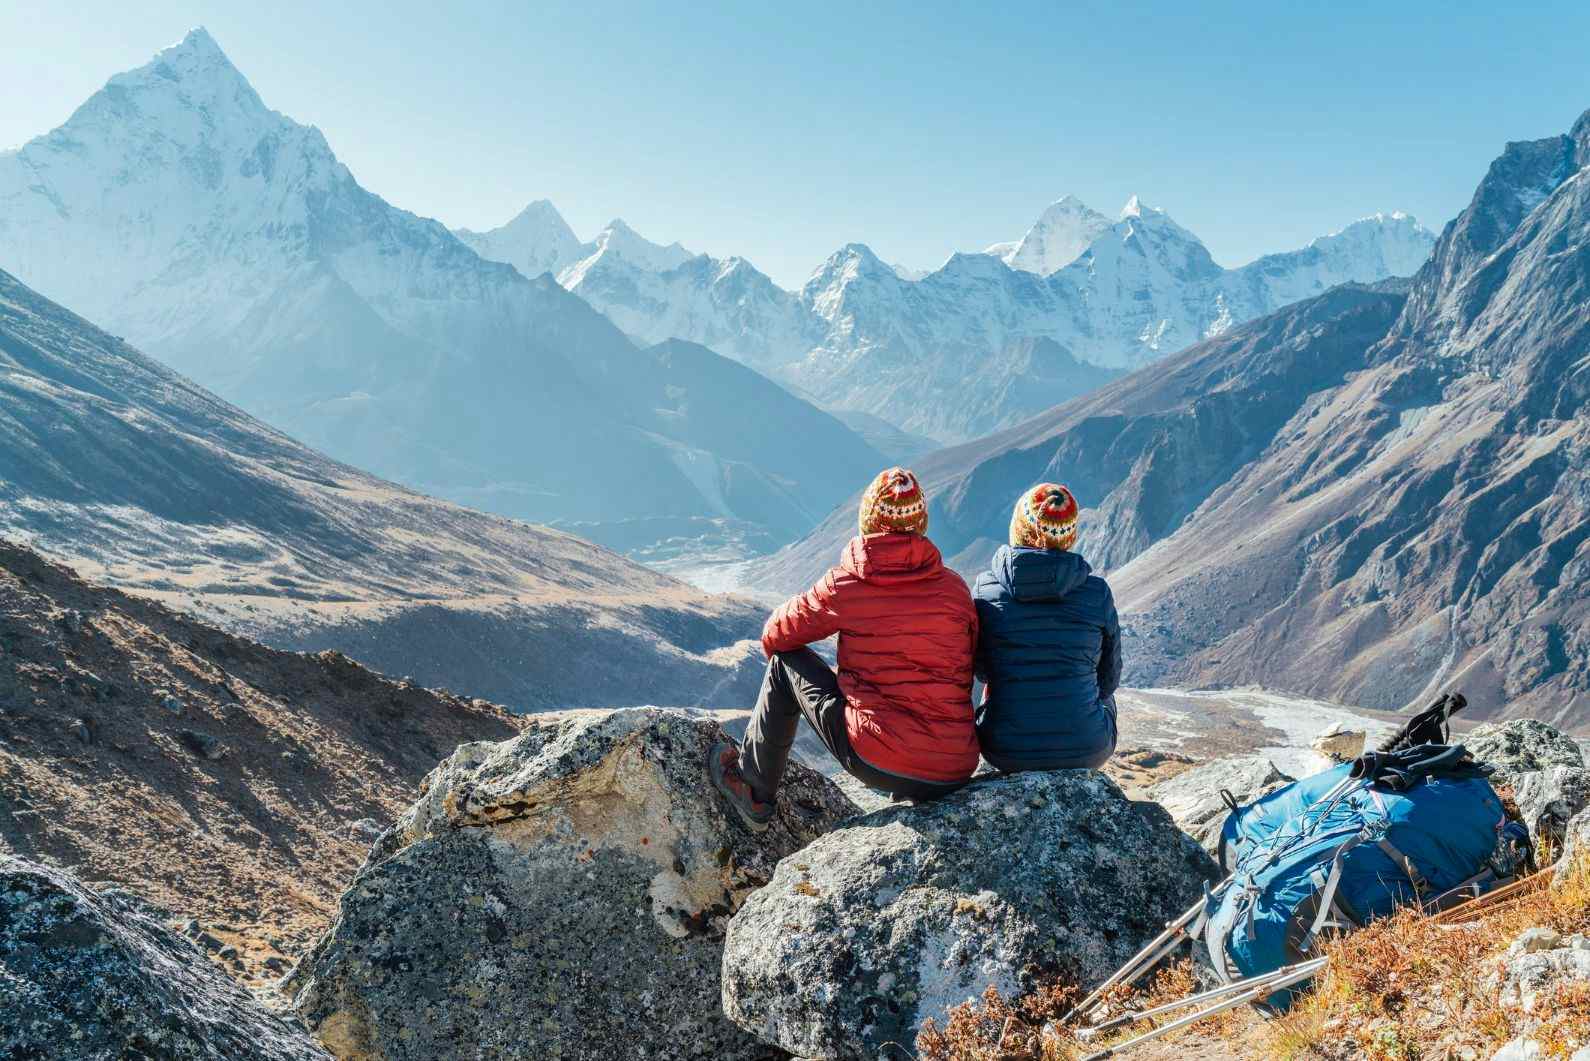 Trekking in Nepal: 8 Things to Know Before Your Hiking Trip